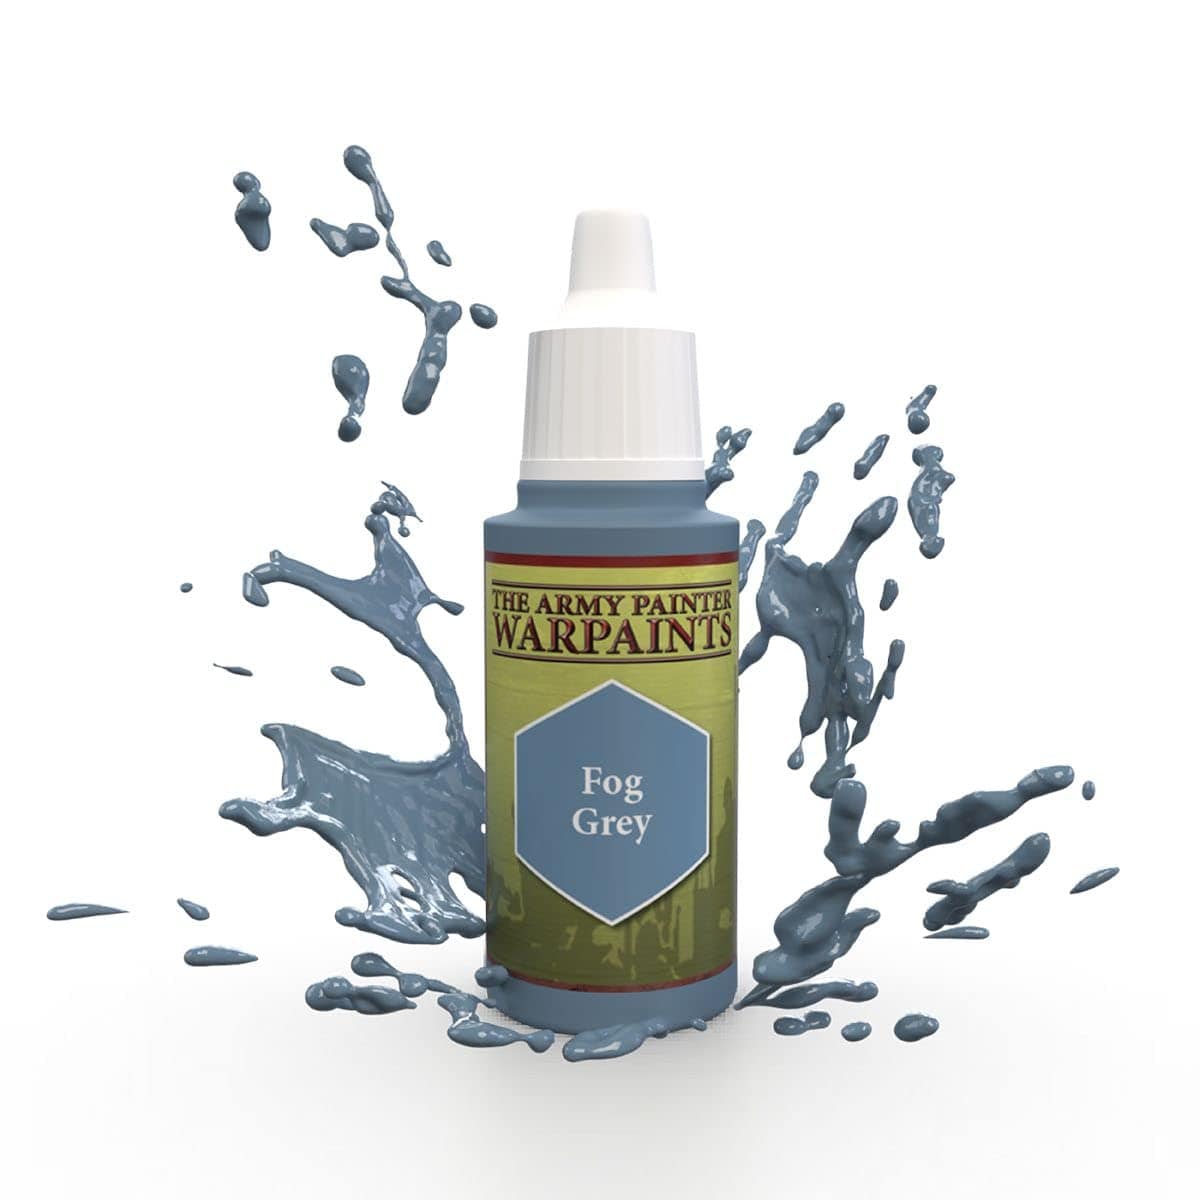 The Army Painter Accessories The Army Painter Warpaints: Fog Grey 18ml